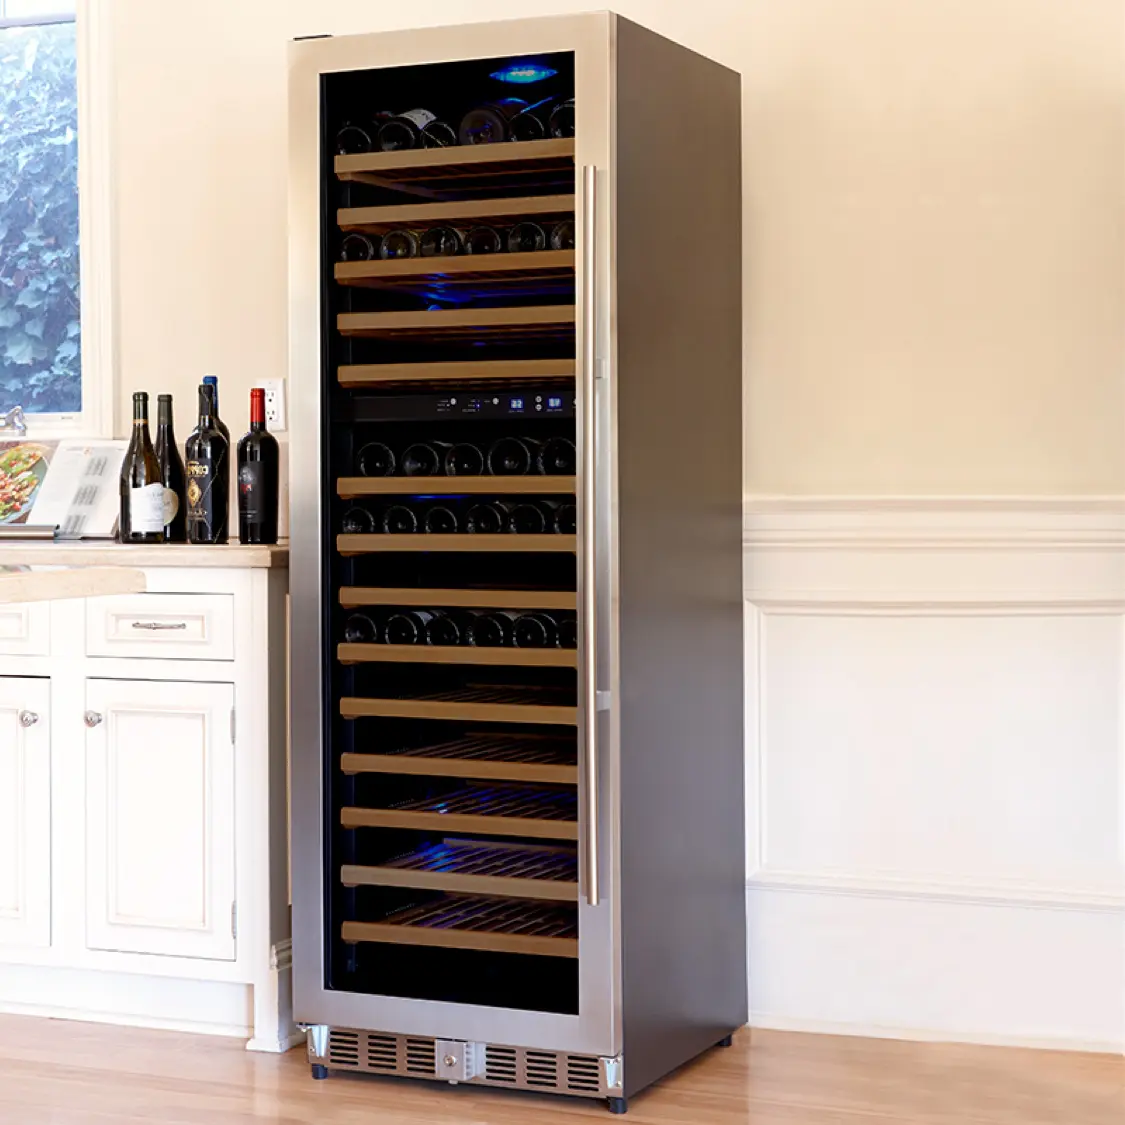 Click here to see more loft/vault styled styled wine cabinets